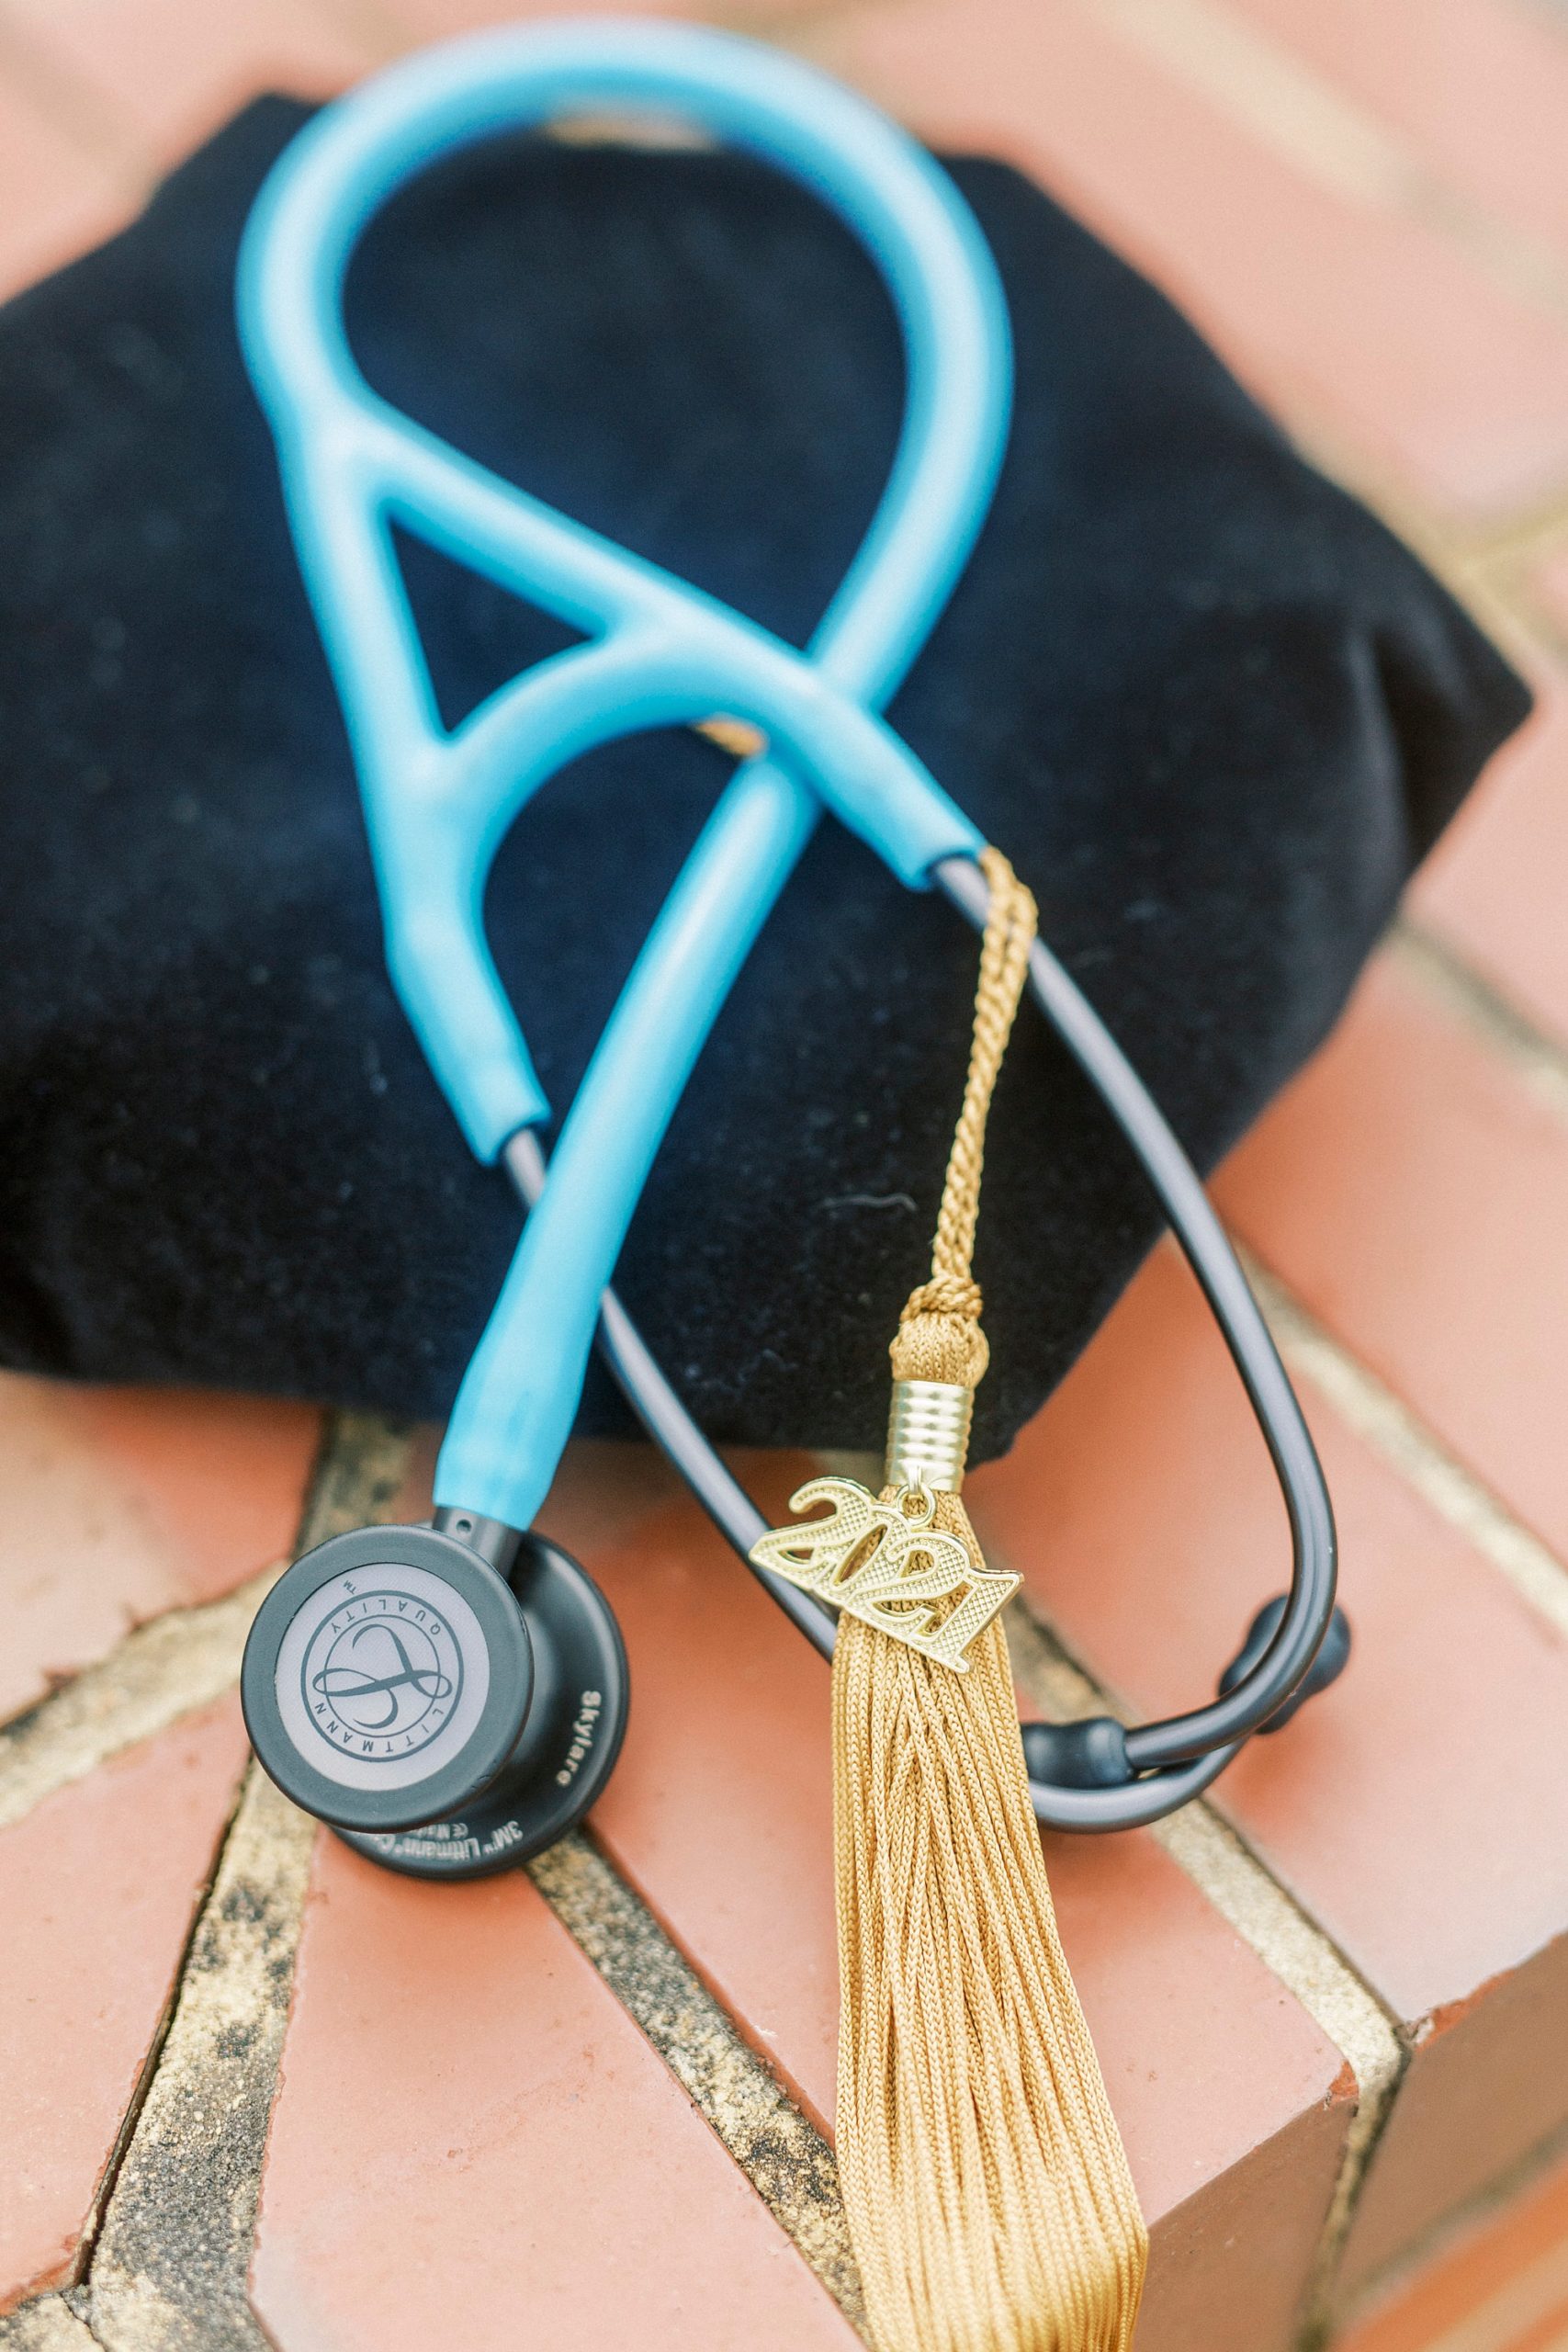 stethoscope for doctor lays on graduation hat